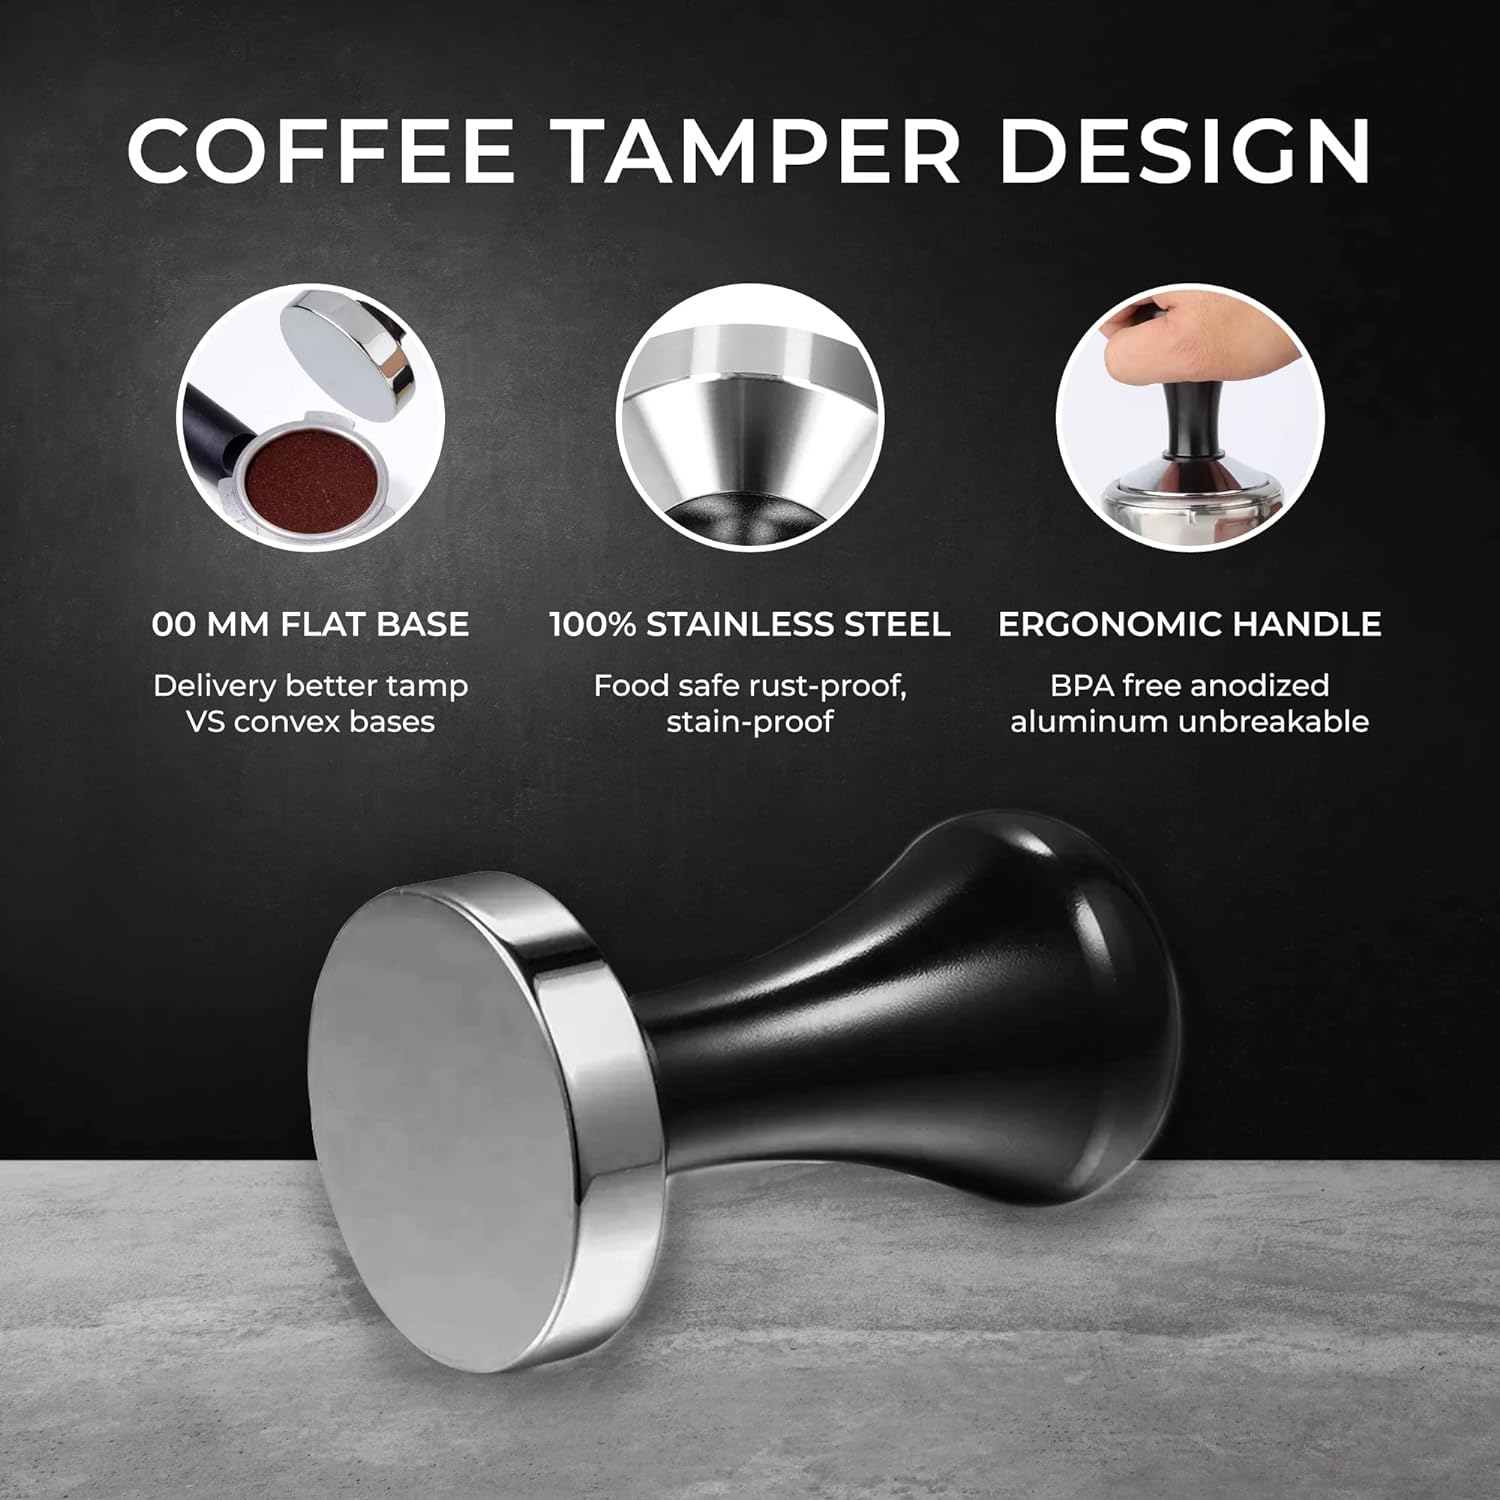 Baristas Dream Coffee Set: Premium Accessories for Perfect Espresso and cappuccino Milk Frother cup 12oz (350 ml), Stainless Steel Jug + Tamper 51 mm